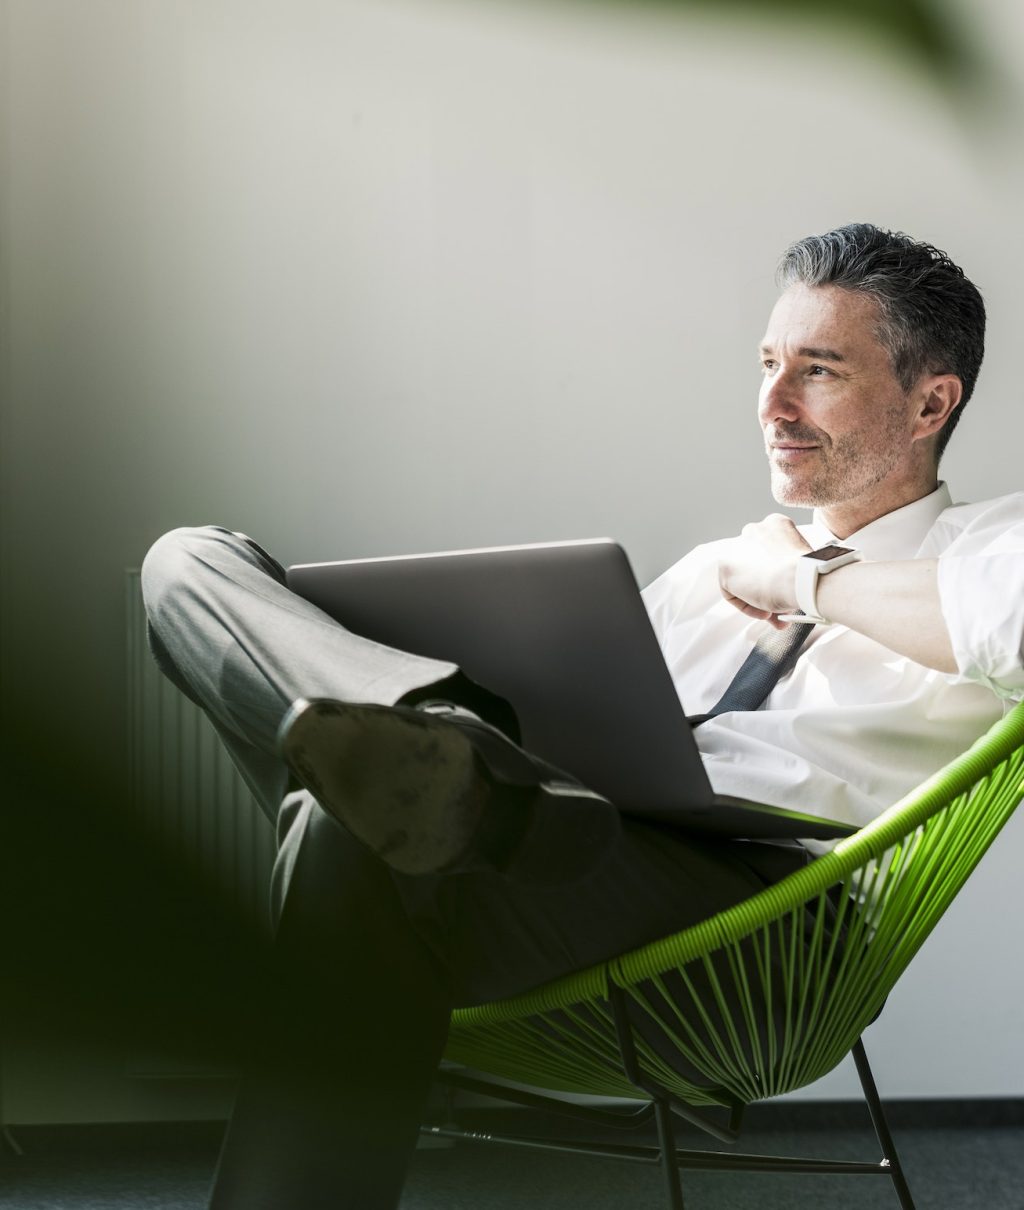 Smiling businessman with laptop sitting in an armchair